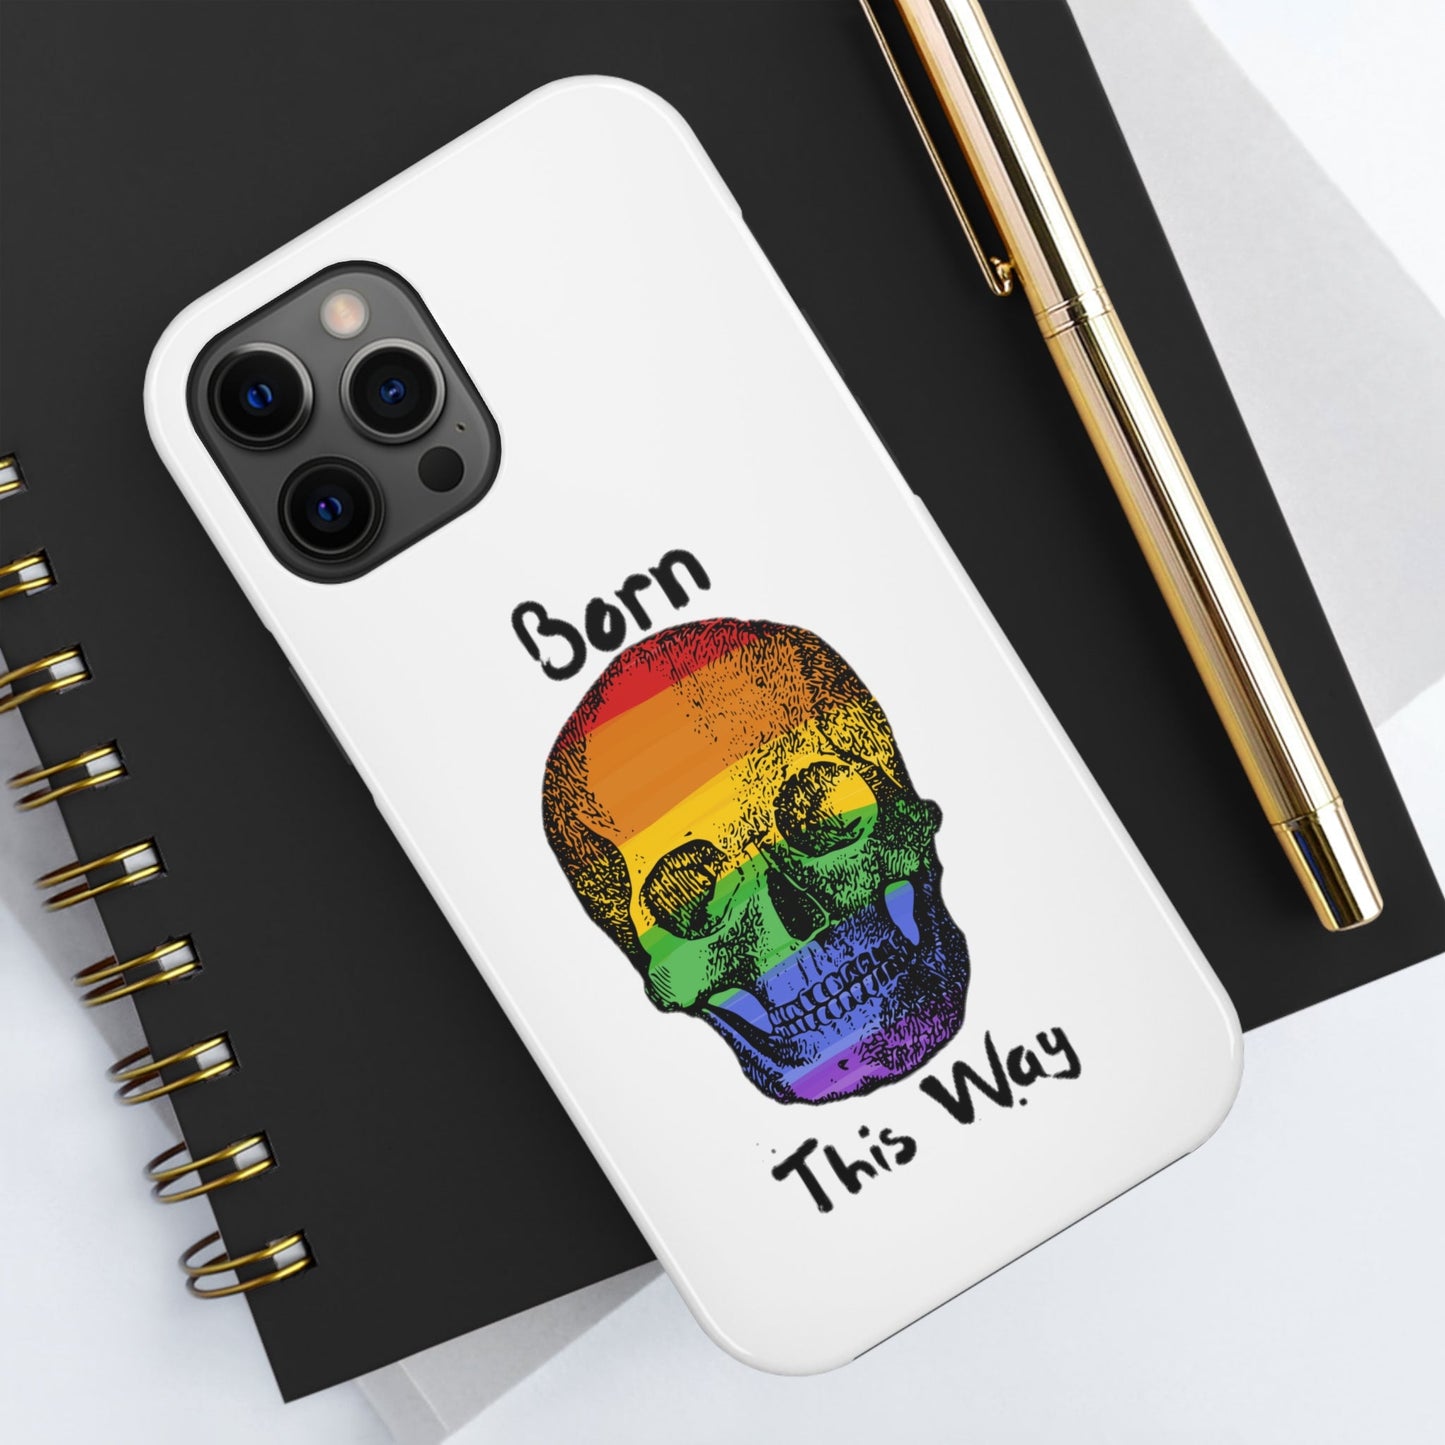 Born This Way Skeleton Pride Tough Phone Cases for iPhone 7, 8, X, 11, 12, 13, 14 and morePhone CaseVTZdesignsiPhone 12 Pro MaxAccessoriesGlossyiPhone Cases